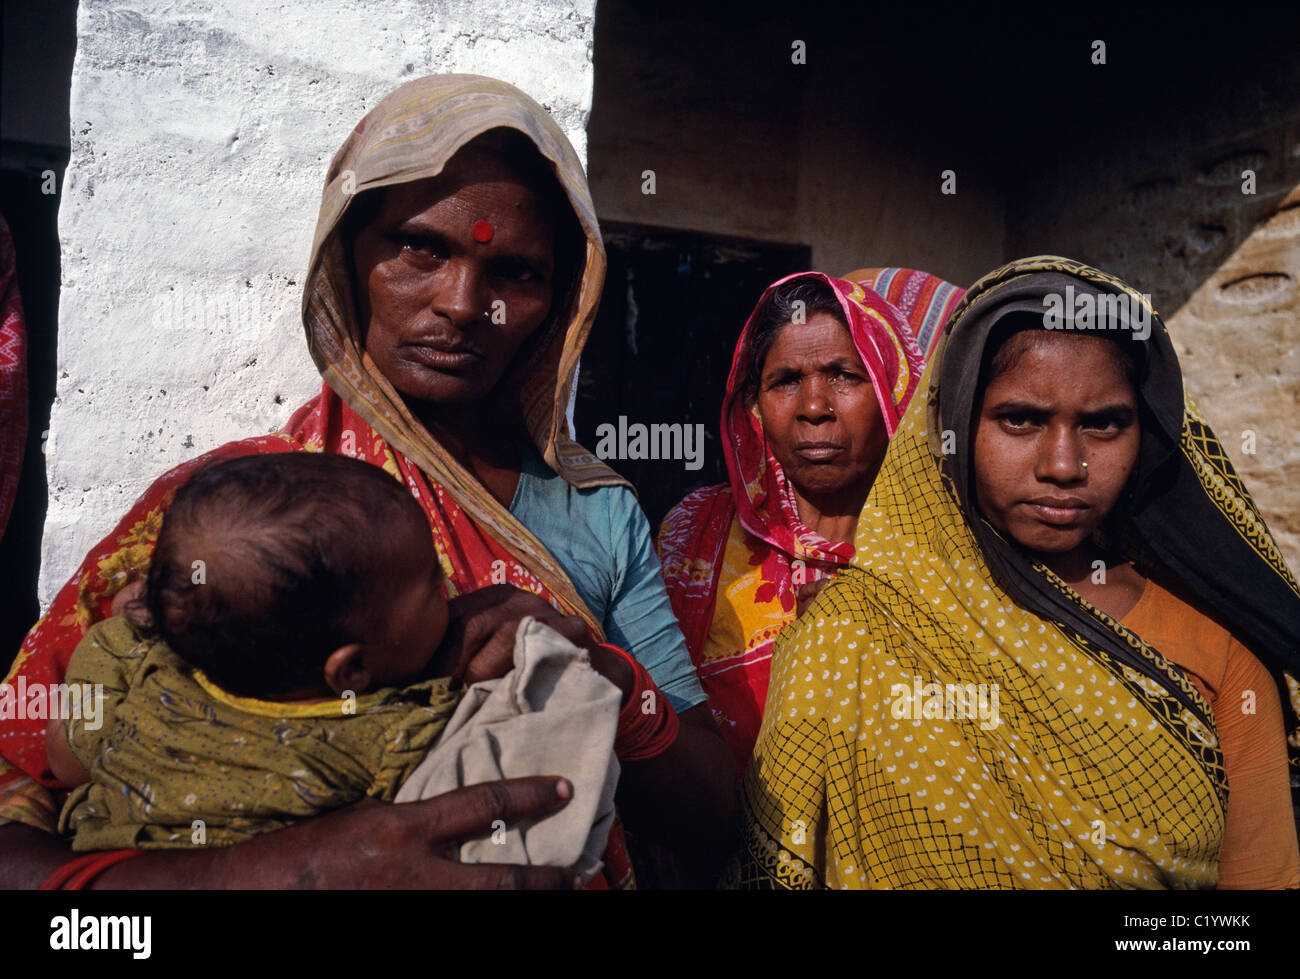 A group of lower caste Indian women stand in front of a building in rural Bihar, India. Stock Photo